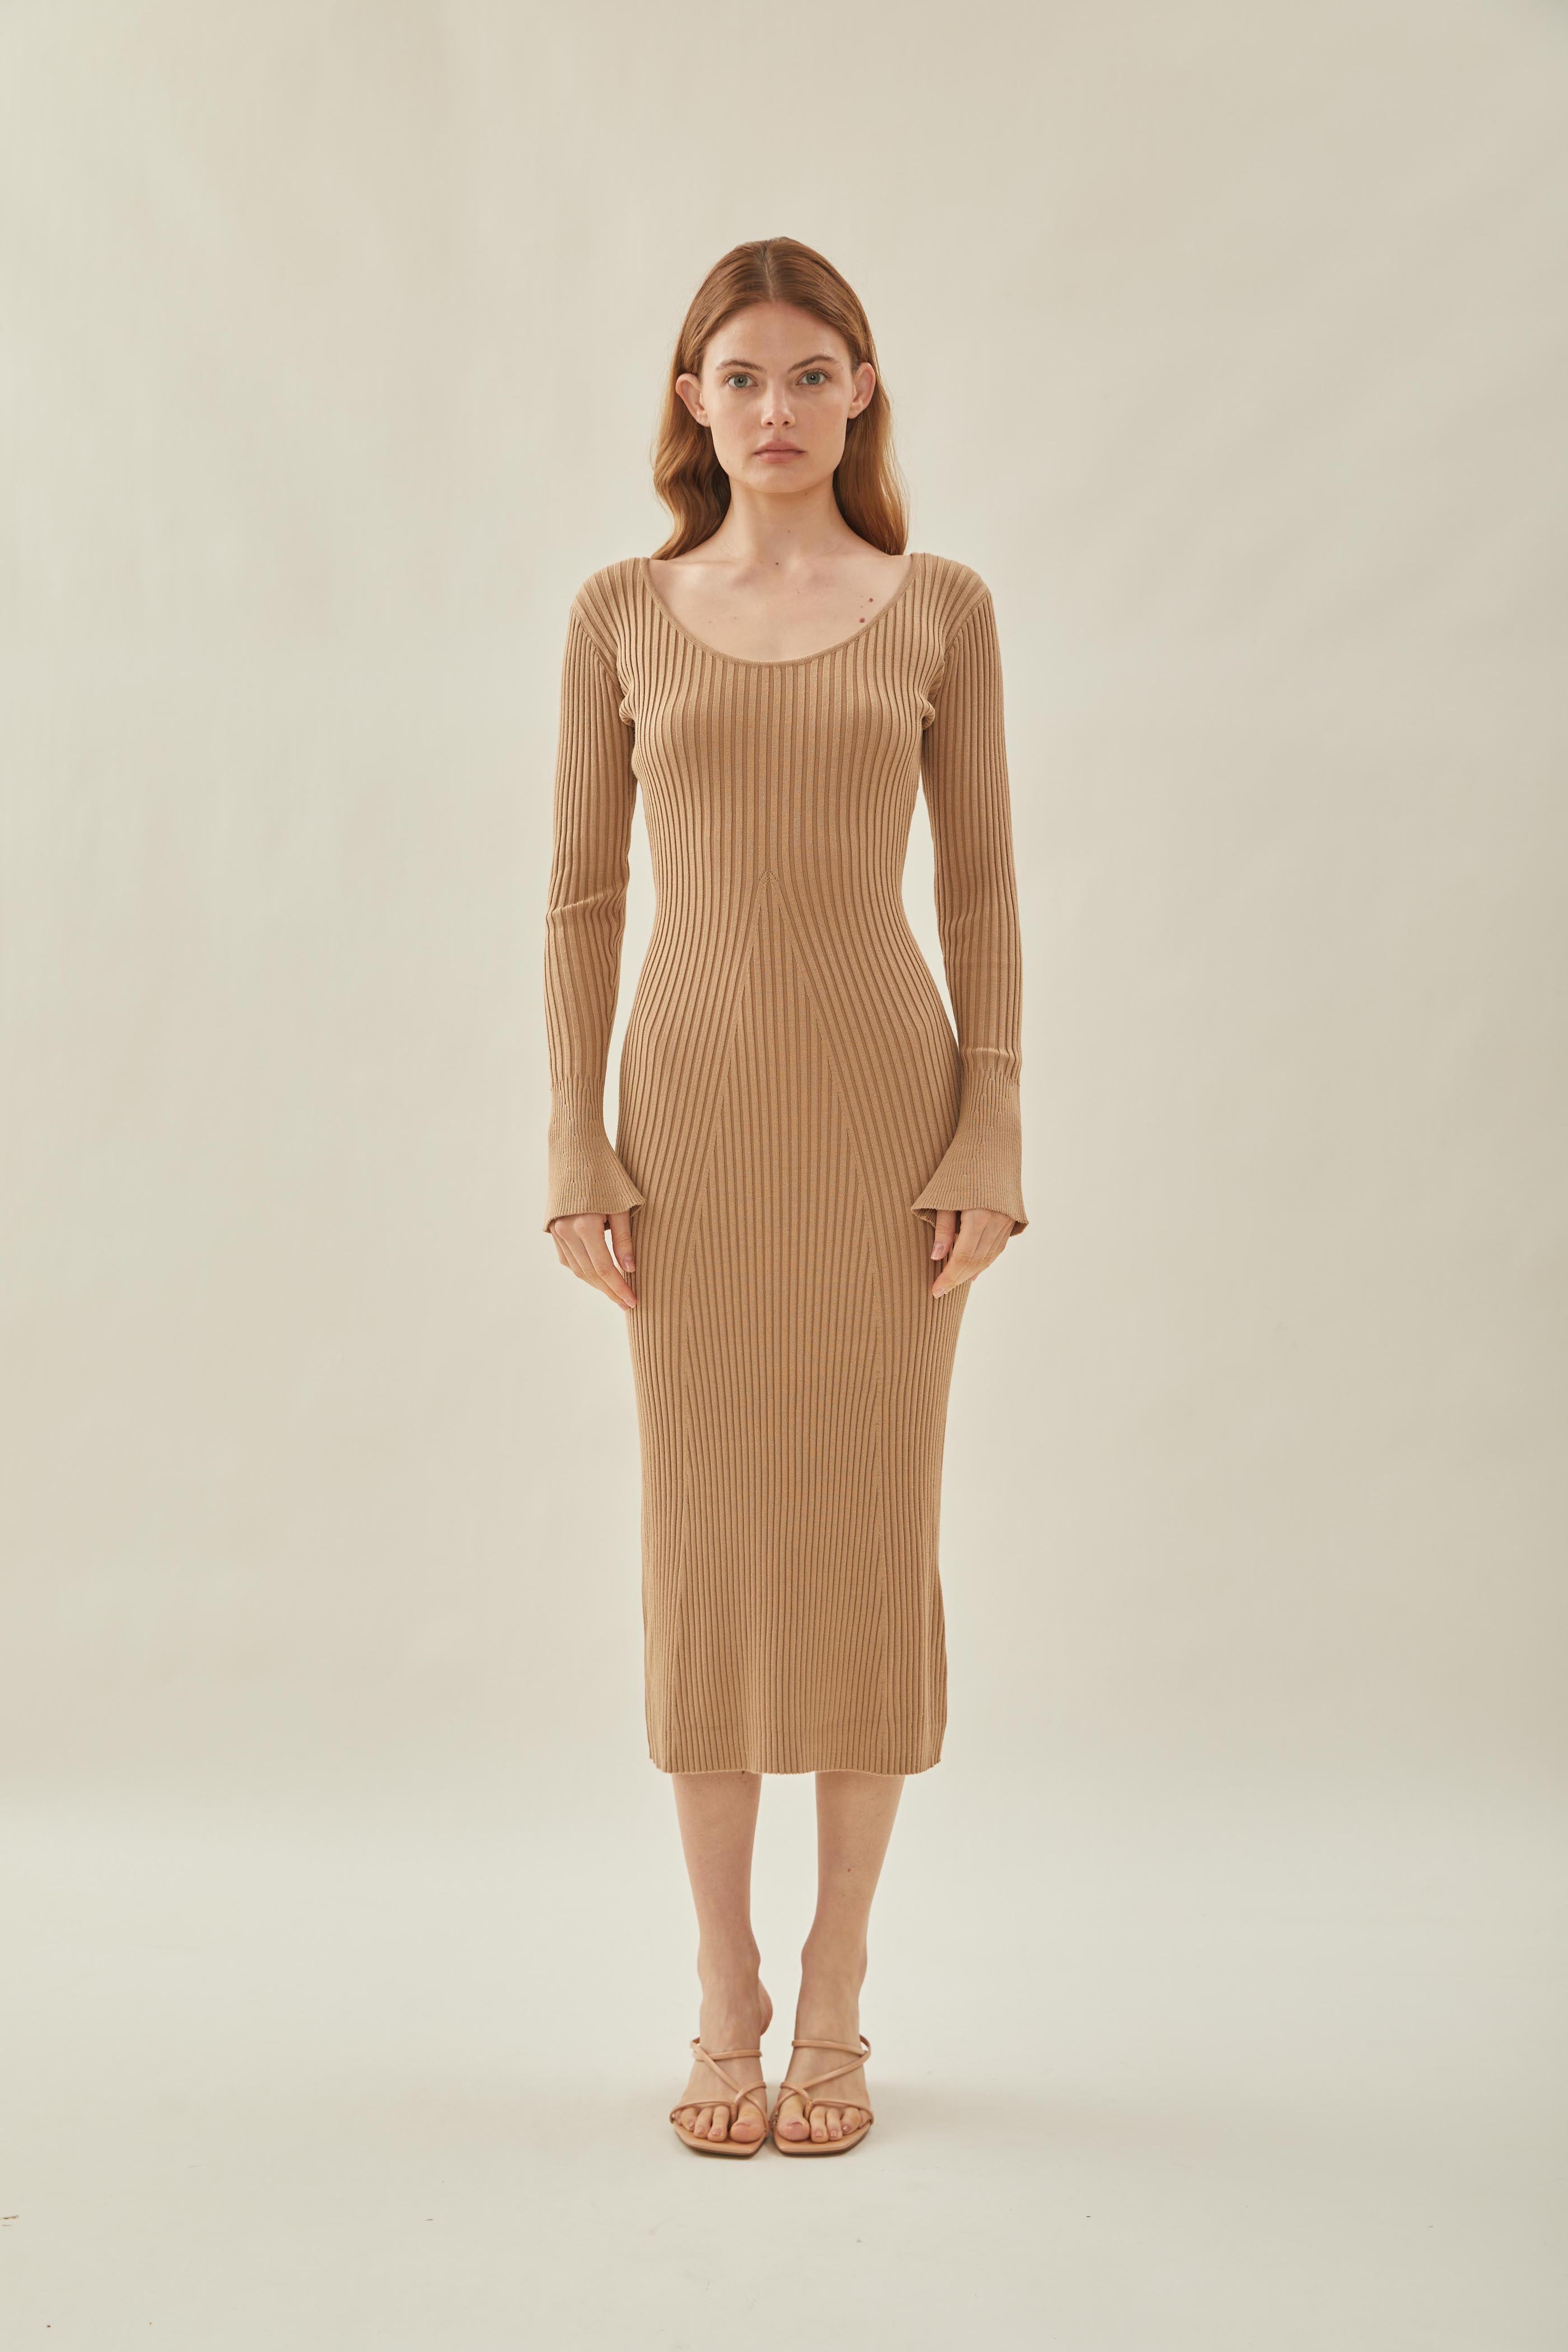 Scooped Neck Sleeved Ribbed Knit Dress in Camel